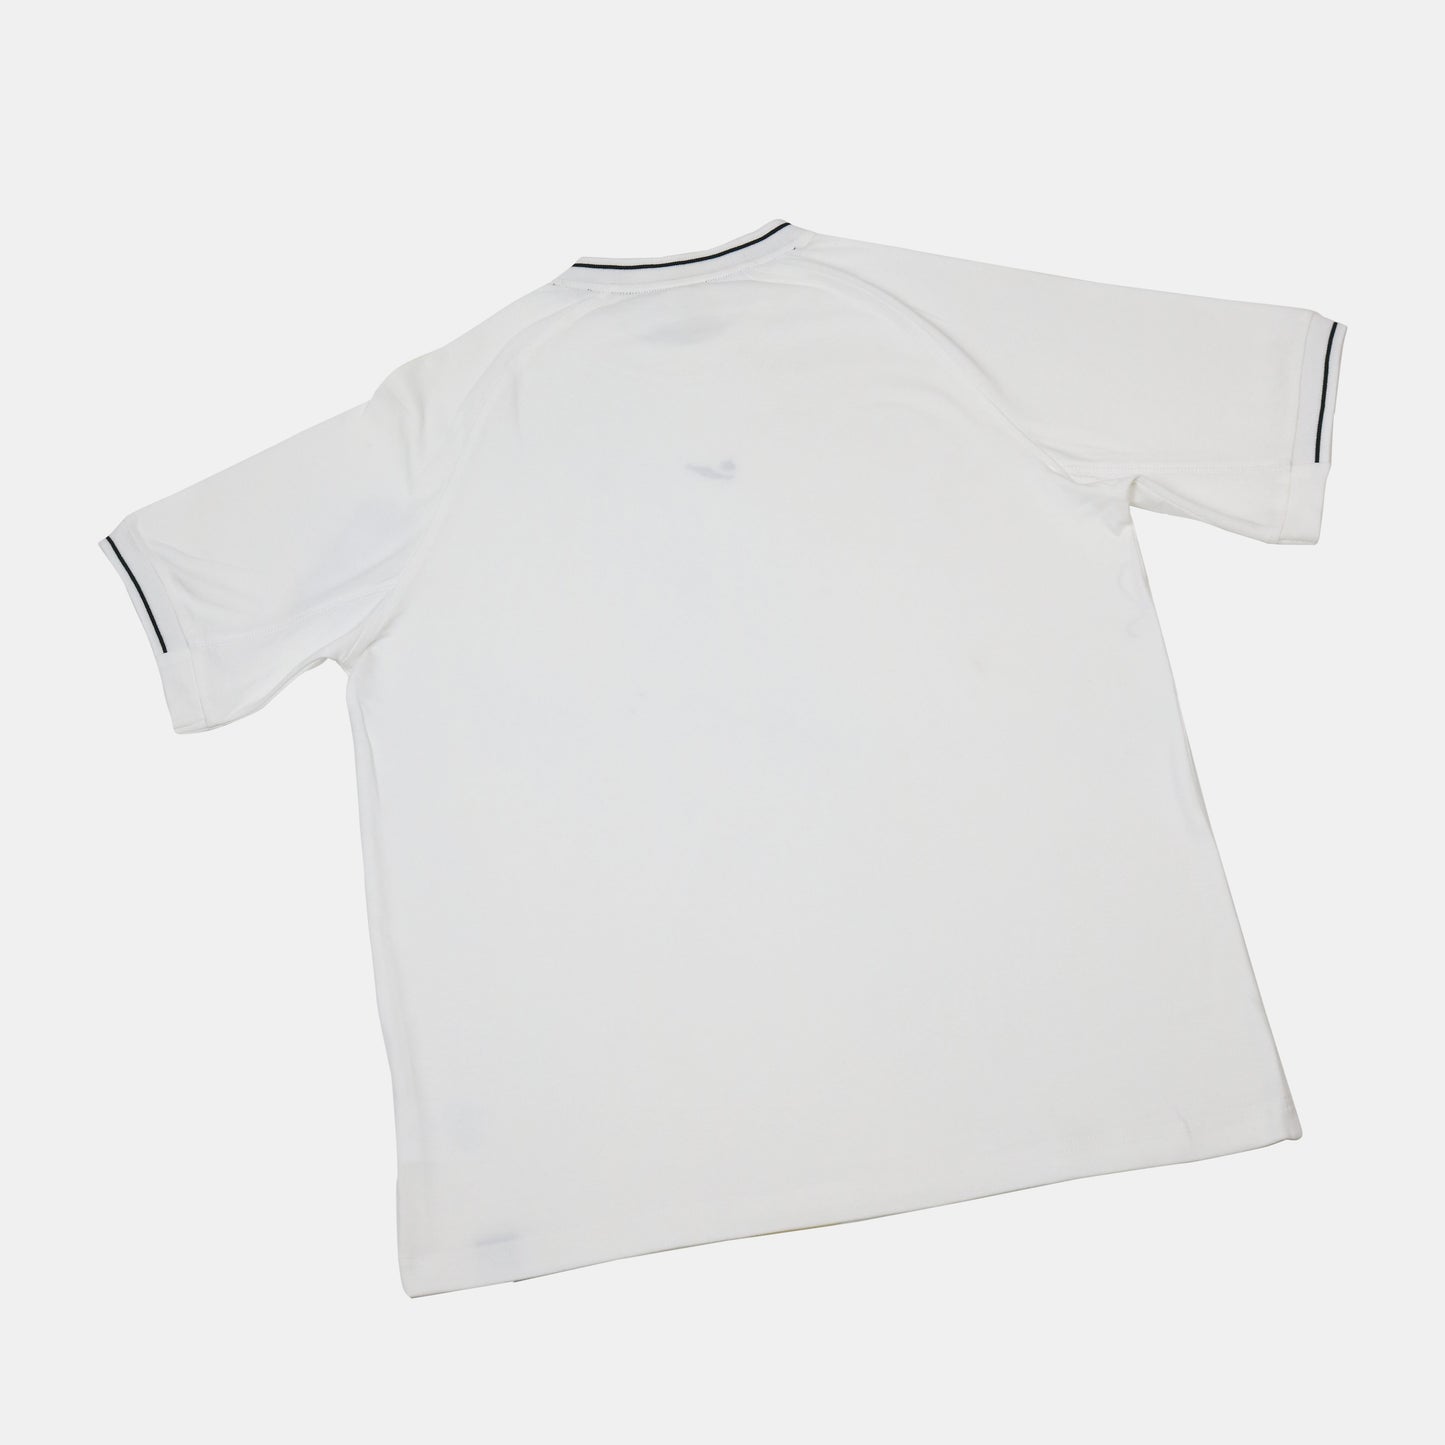 CAVE CASUAL TEE THRIVE POLO - WHITE/BLACK